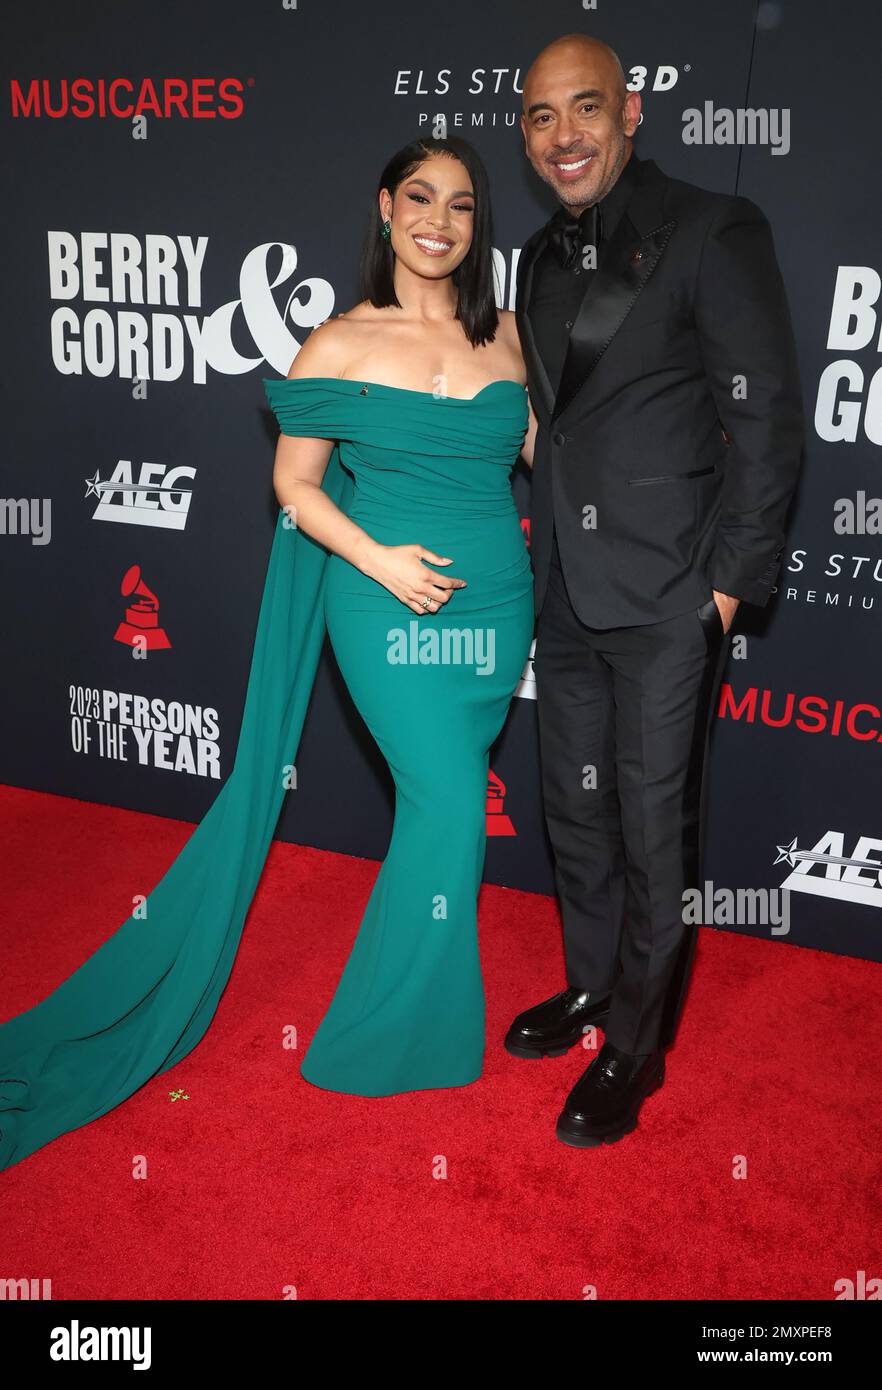 Los Angeles, USA. 03rd Feb, 2023. Jordin Sparks, Harvey Mason jr., at 2023 MusiCares Persons Of The Year Honoring Berry Gordy And Smokey Robinson at Los Angeles Convention Center in Los Angeles, CA, USA on February 3, 2022. Photo by Fati Sadou/ABACAPRESS.COM Credit: Abaca Press/Alamy Live News Stock Photo